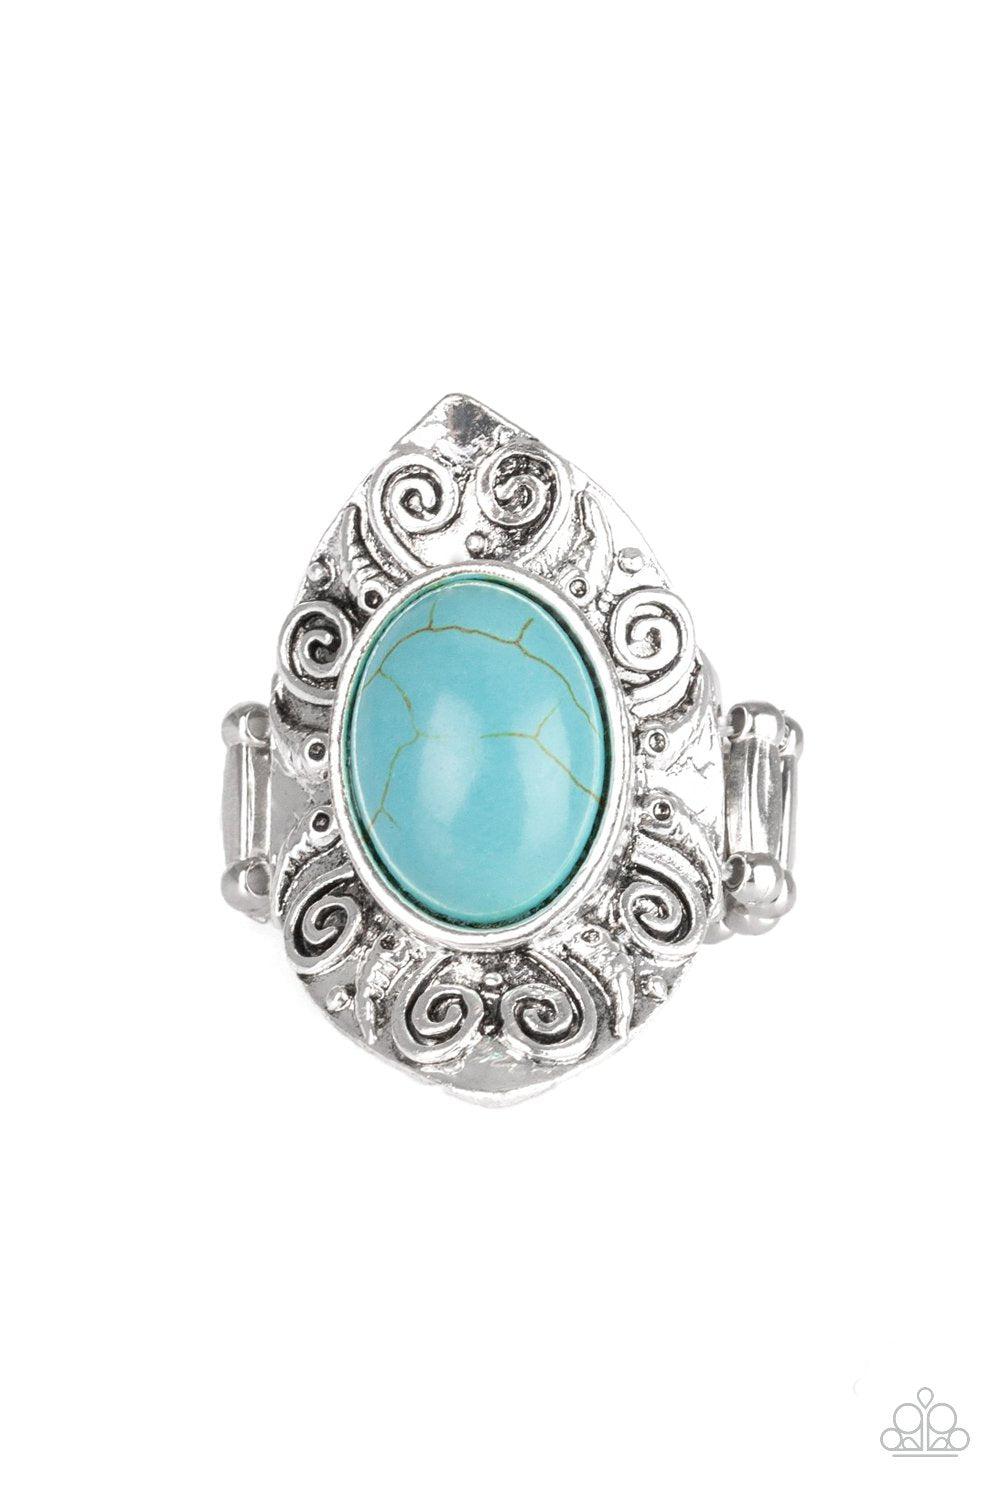 Mega Mother Nature Turquoise Blue Stone Ring - Paparazzi Accessories- lightbox - CarasShop.com - $5 Jewelry by Cara Jewels